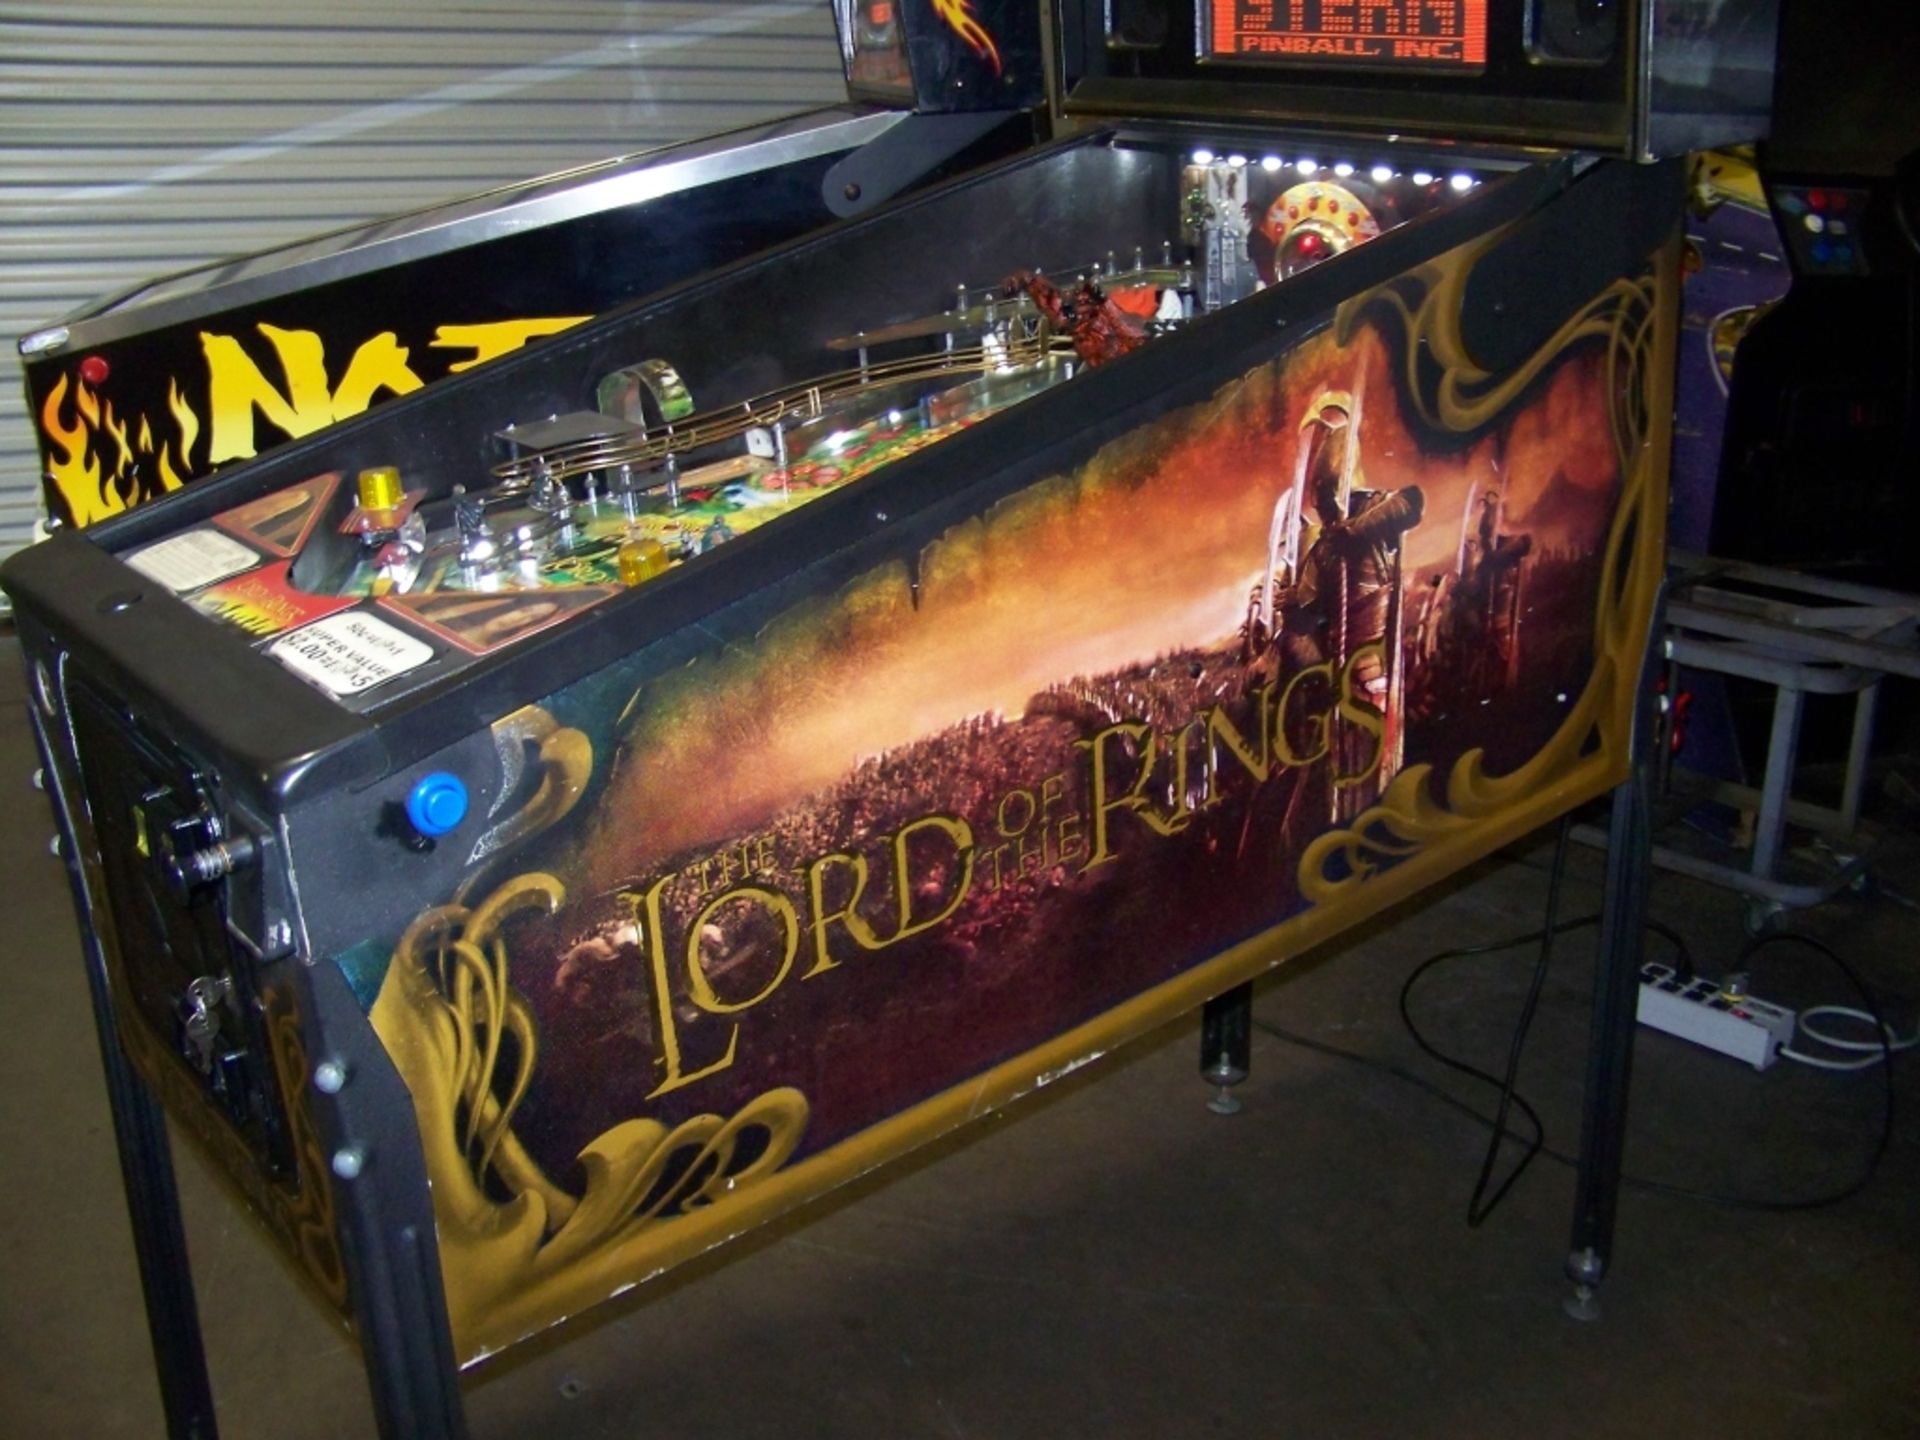 LORD OF THE RINGS PINBALL MACHINE STERN Item is in used condition. Evidence of wear and commercial - Image 9 of 10